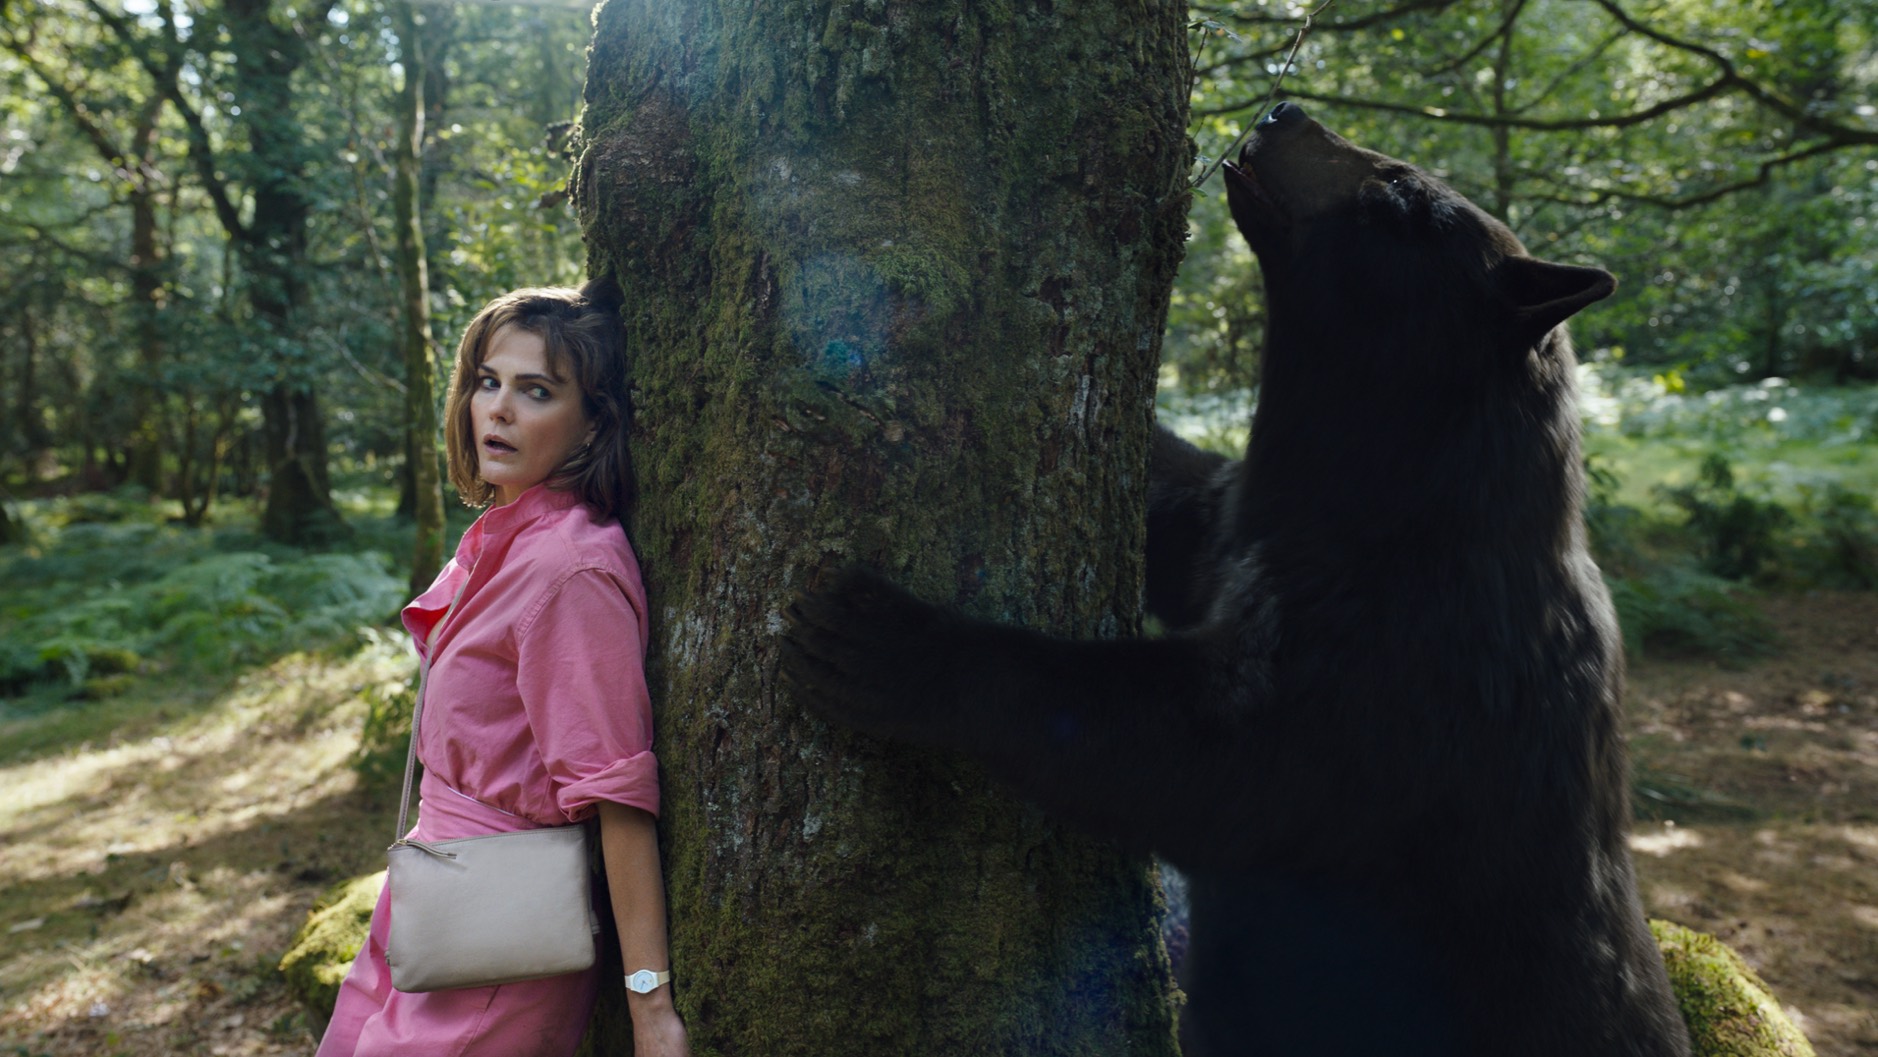 Production still of 'Cocaine Bear'. Image: courtesy of Universal Pictures